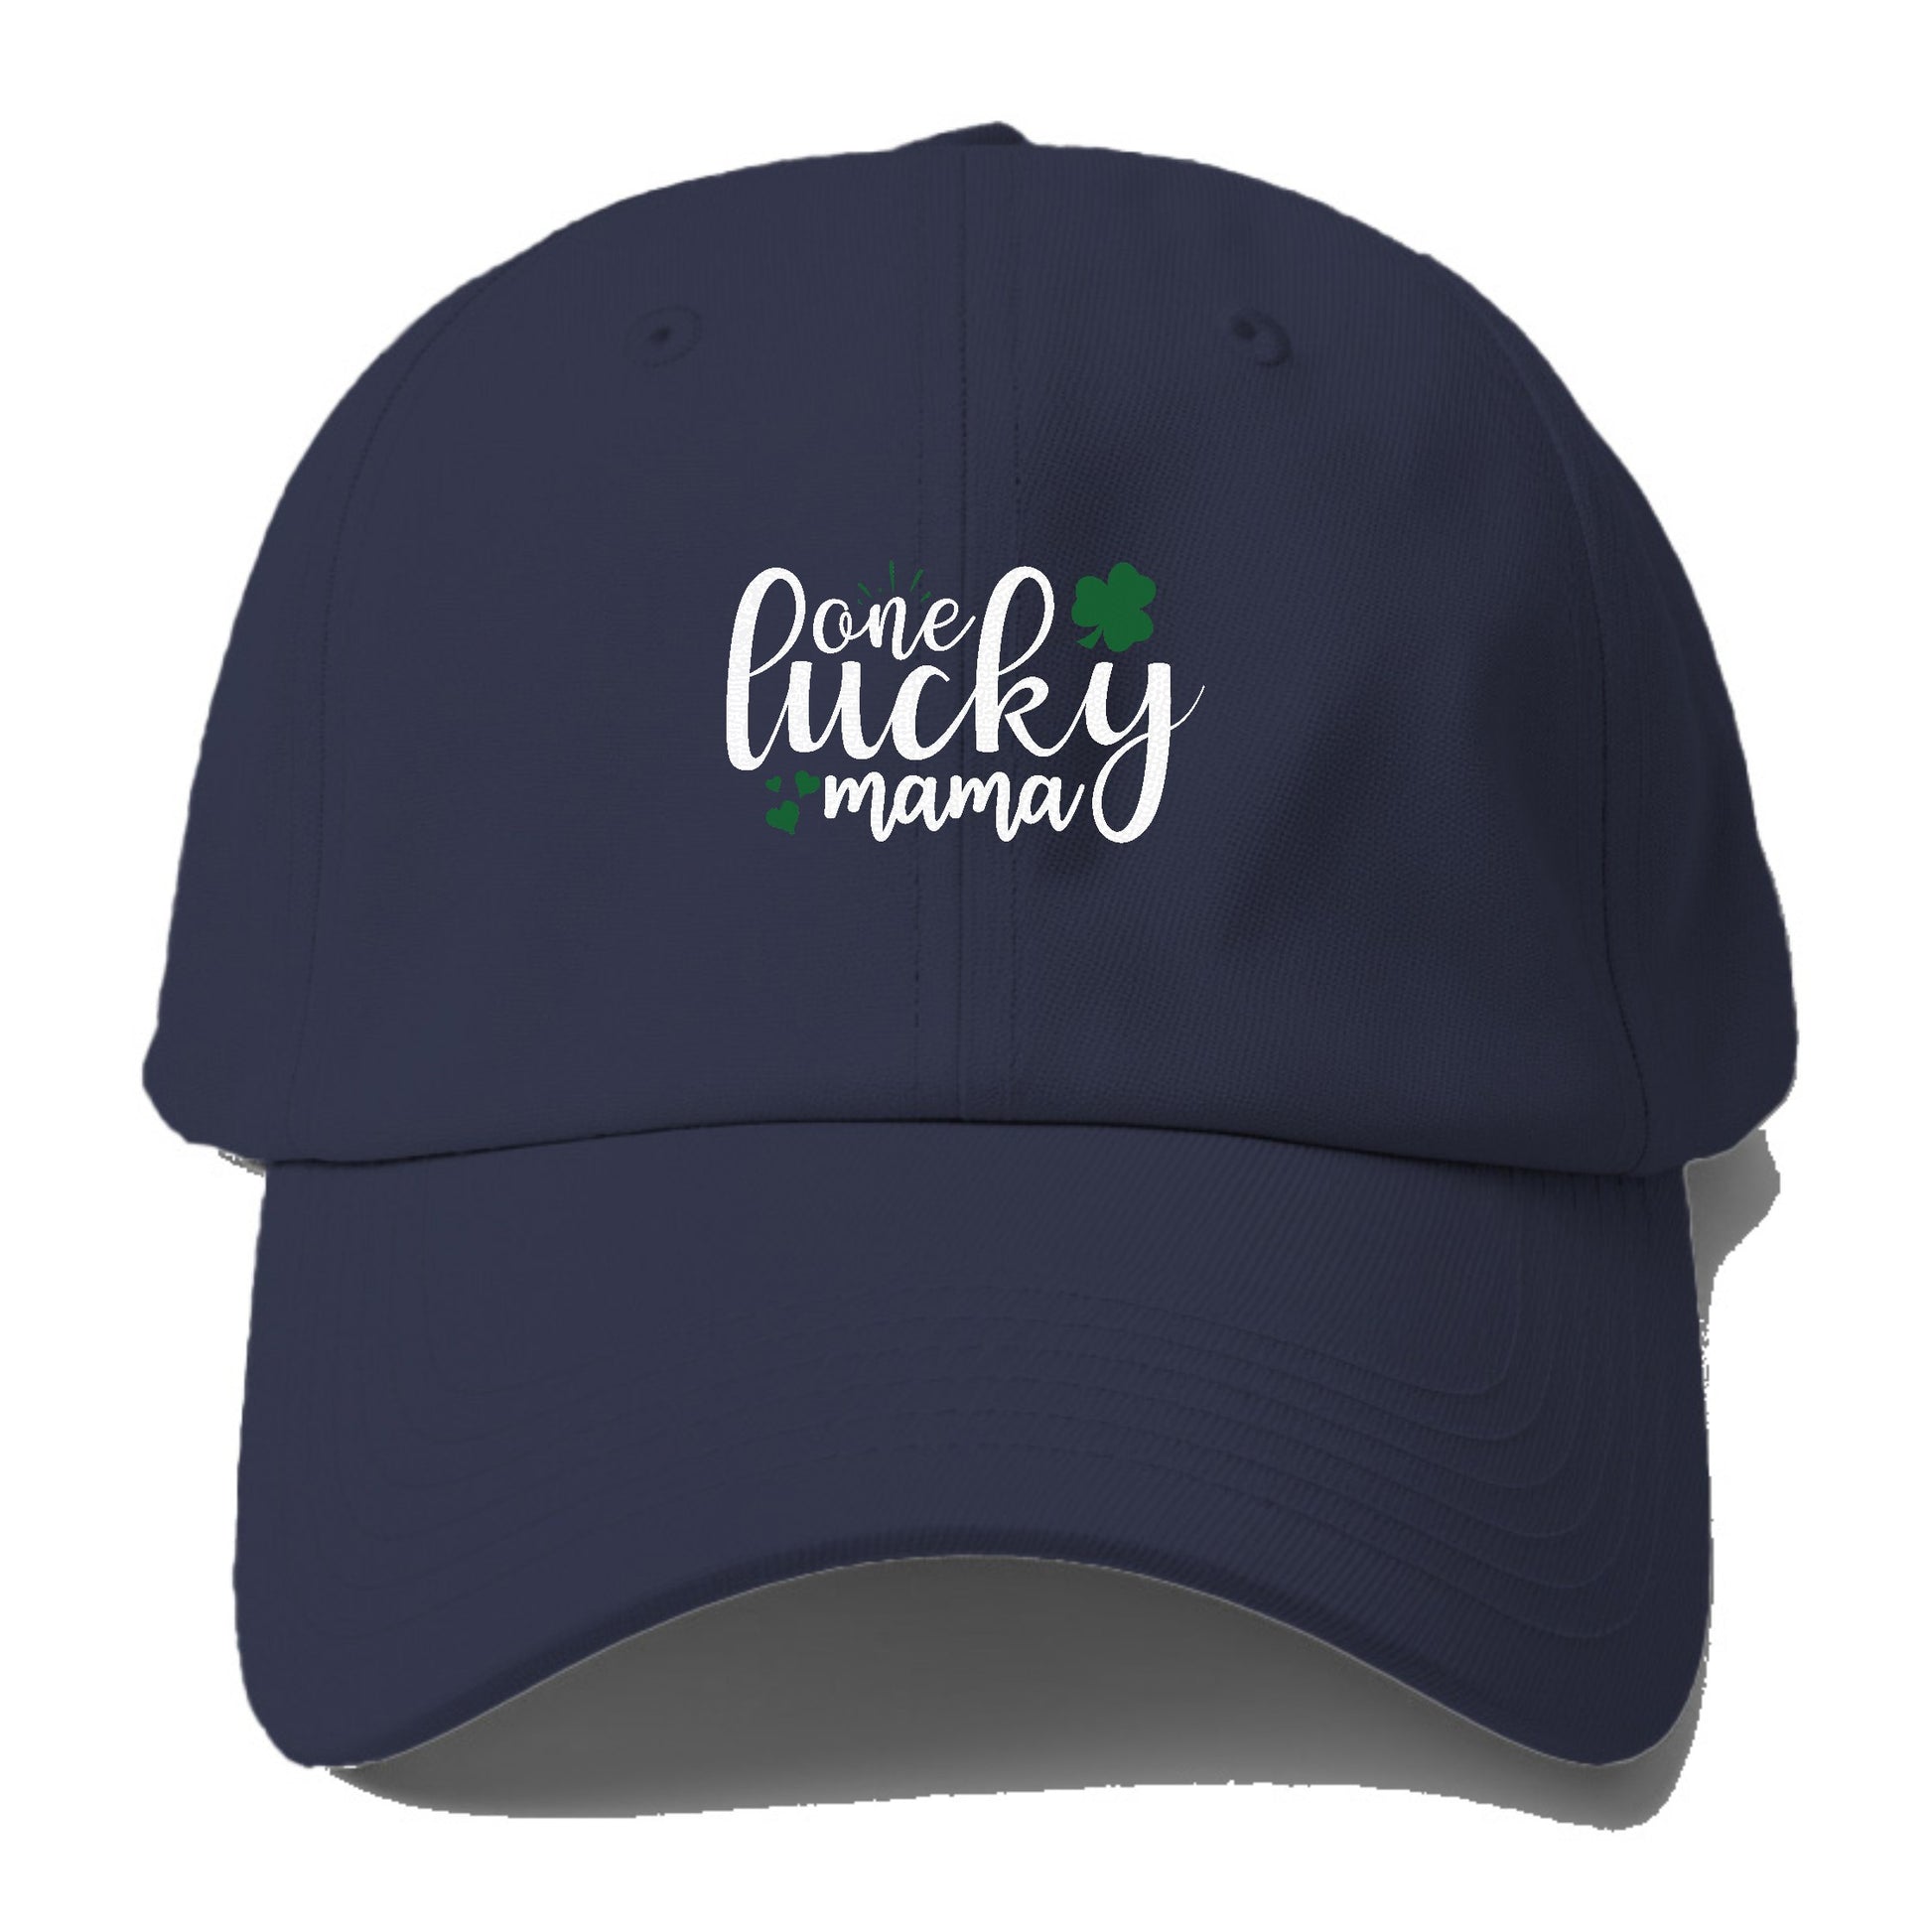 One lucky mama Hat